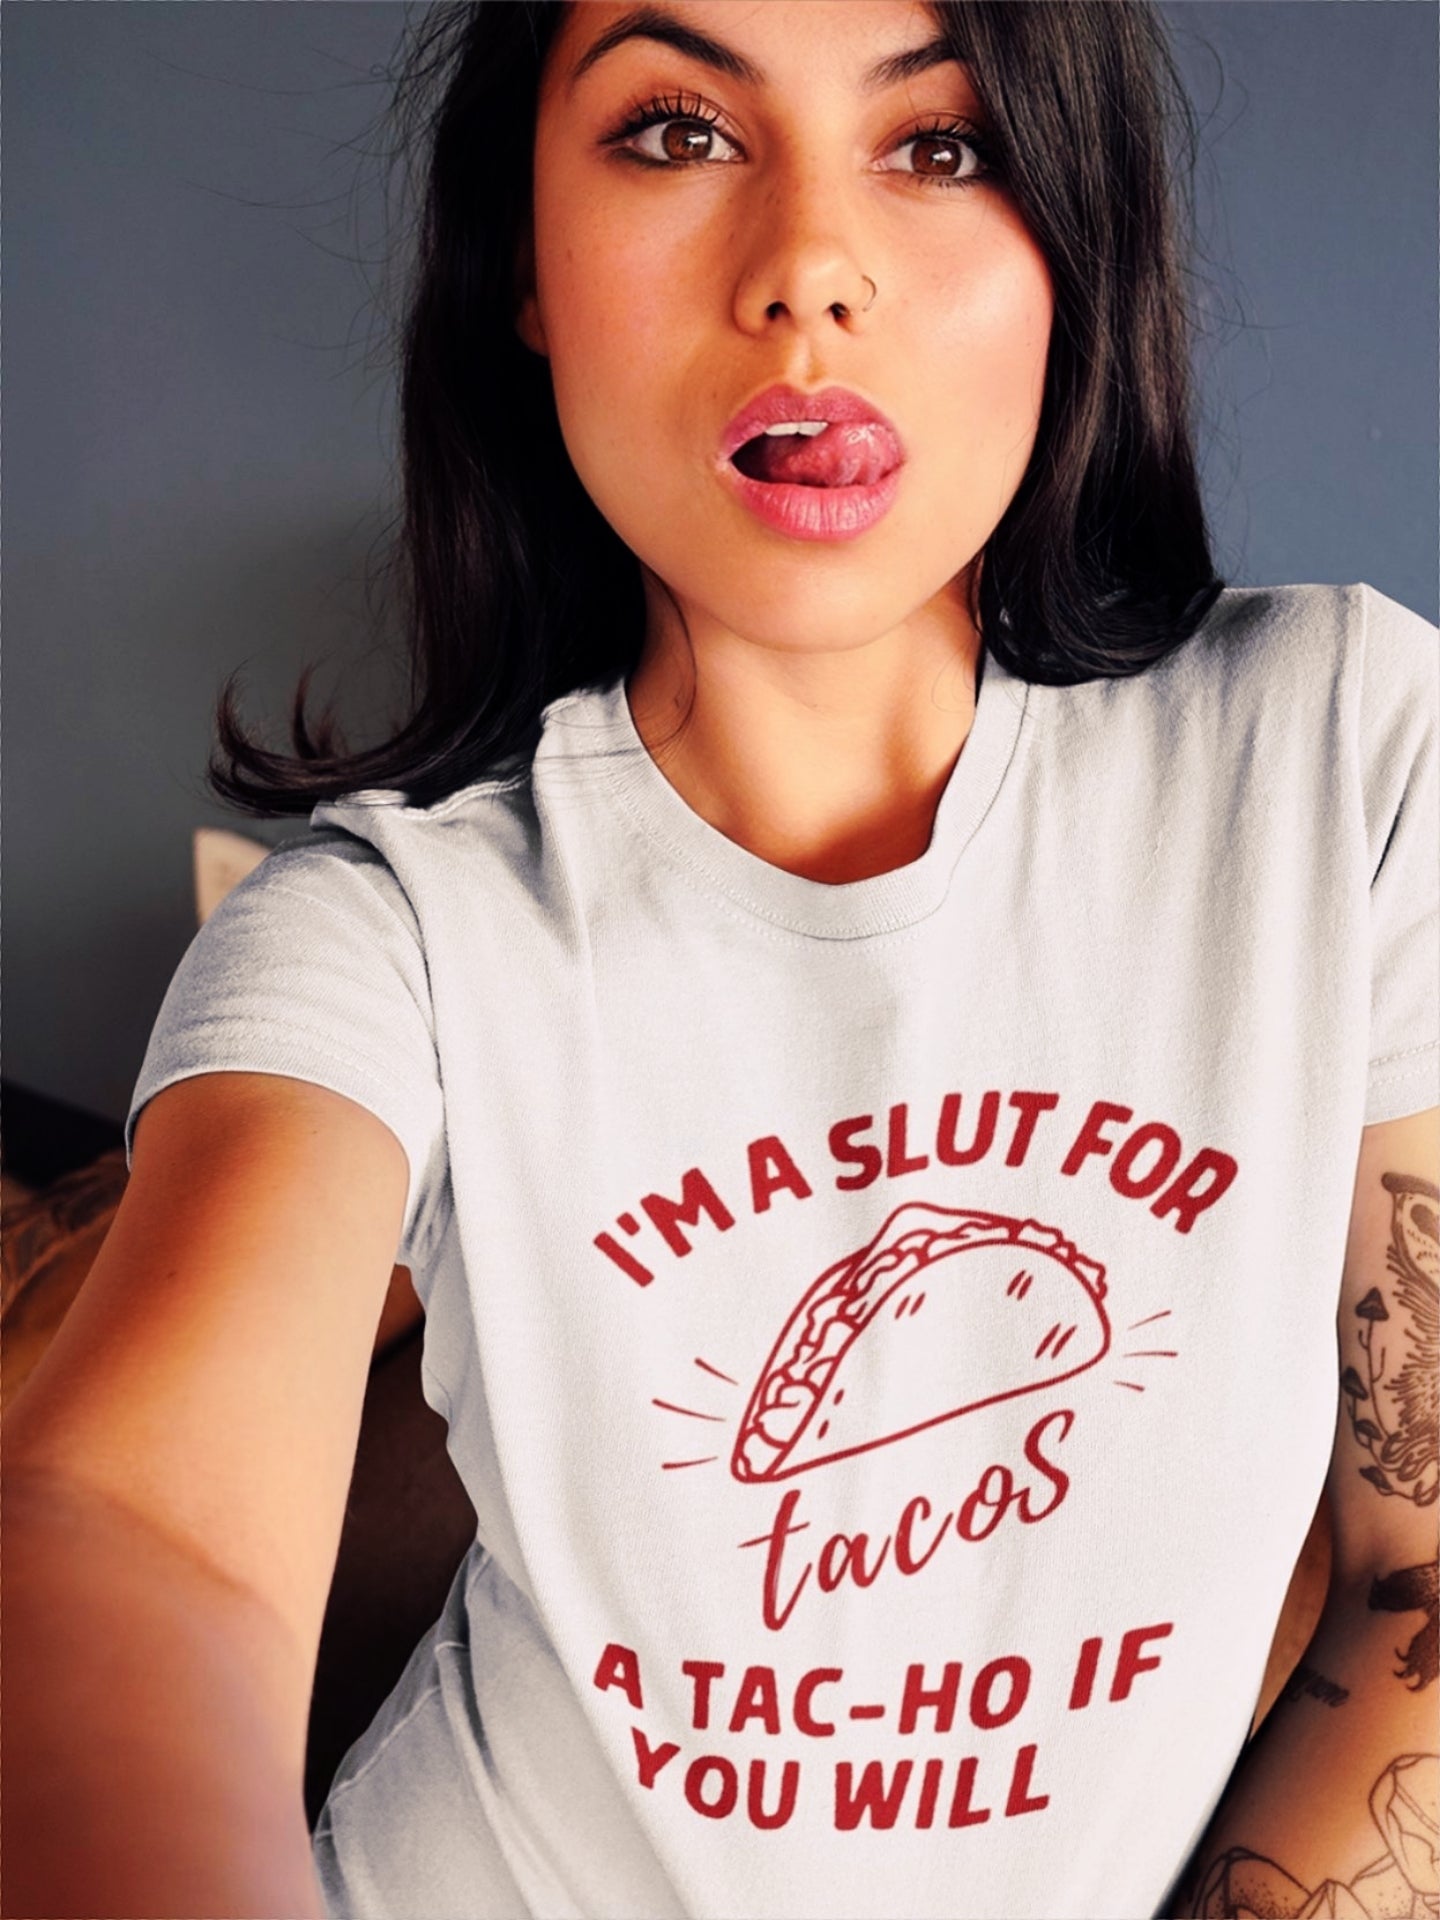 Latina woman wearing a Funny white T-shirt for Latinos, Spanish speakers, and taco lovers. In classic red lettering, the graphic says "I'm a slut for tacos, a tac-ho, if you will". There is also a stylized taco on the shirt